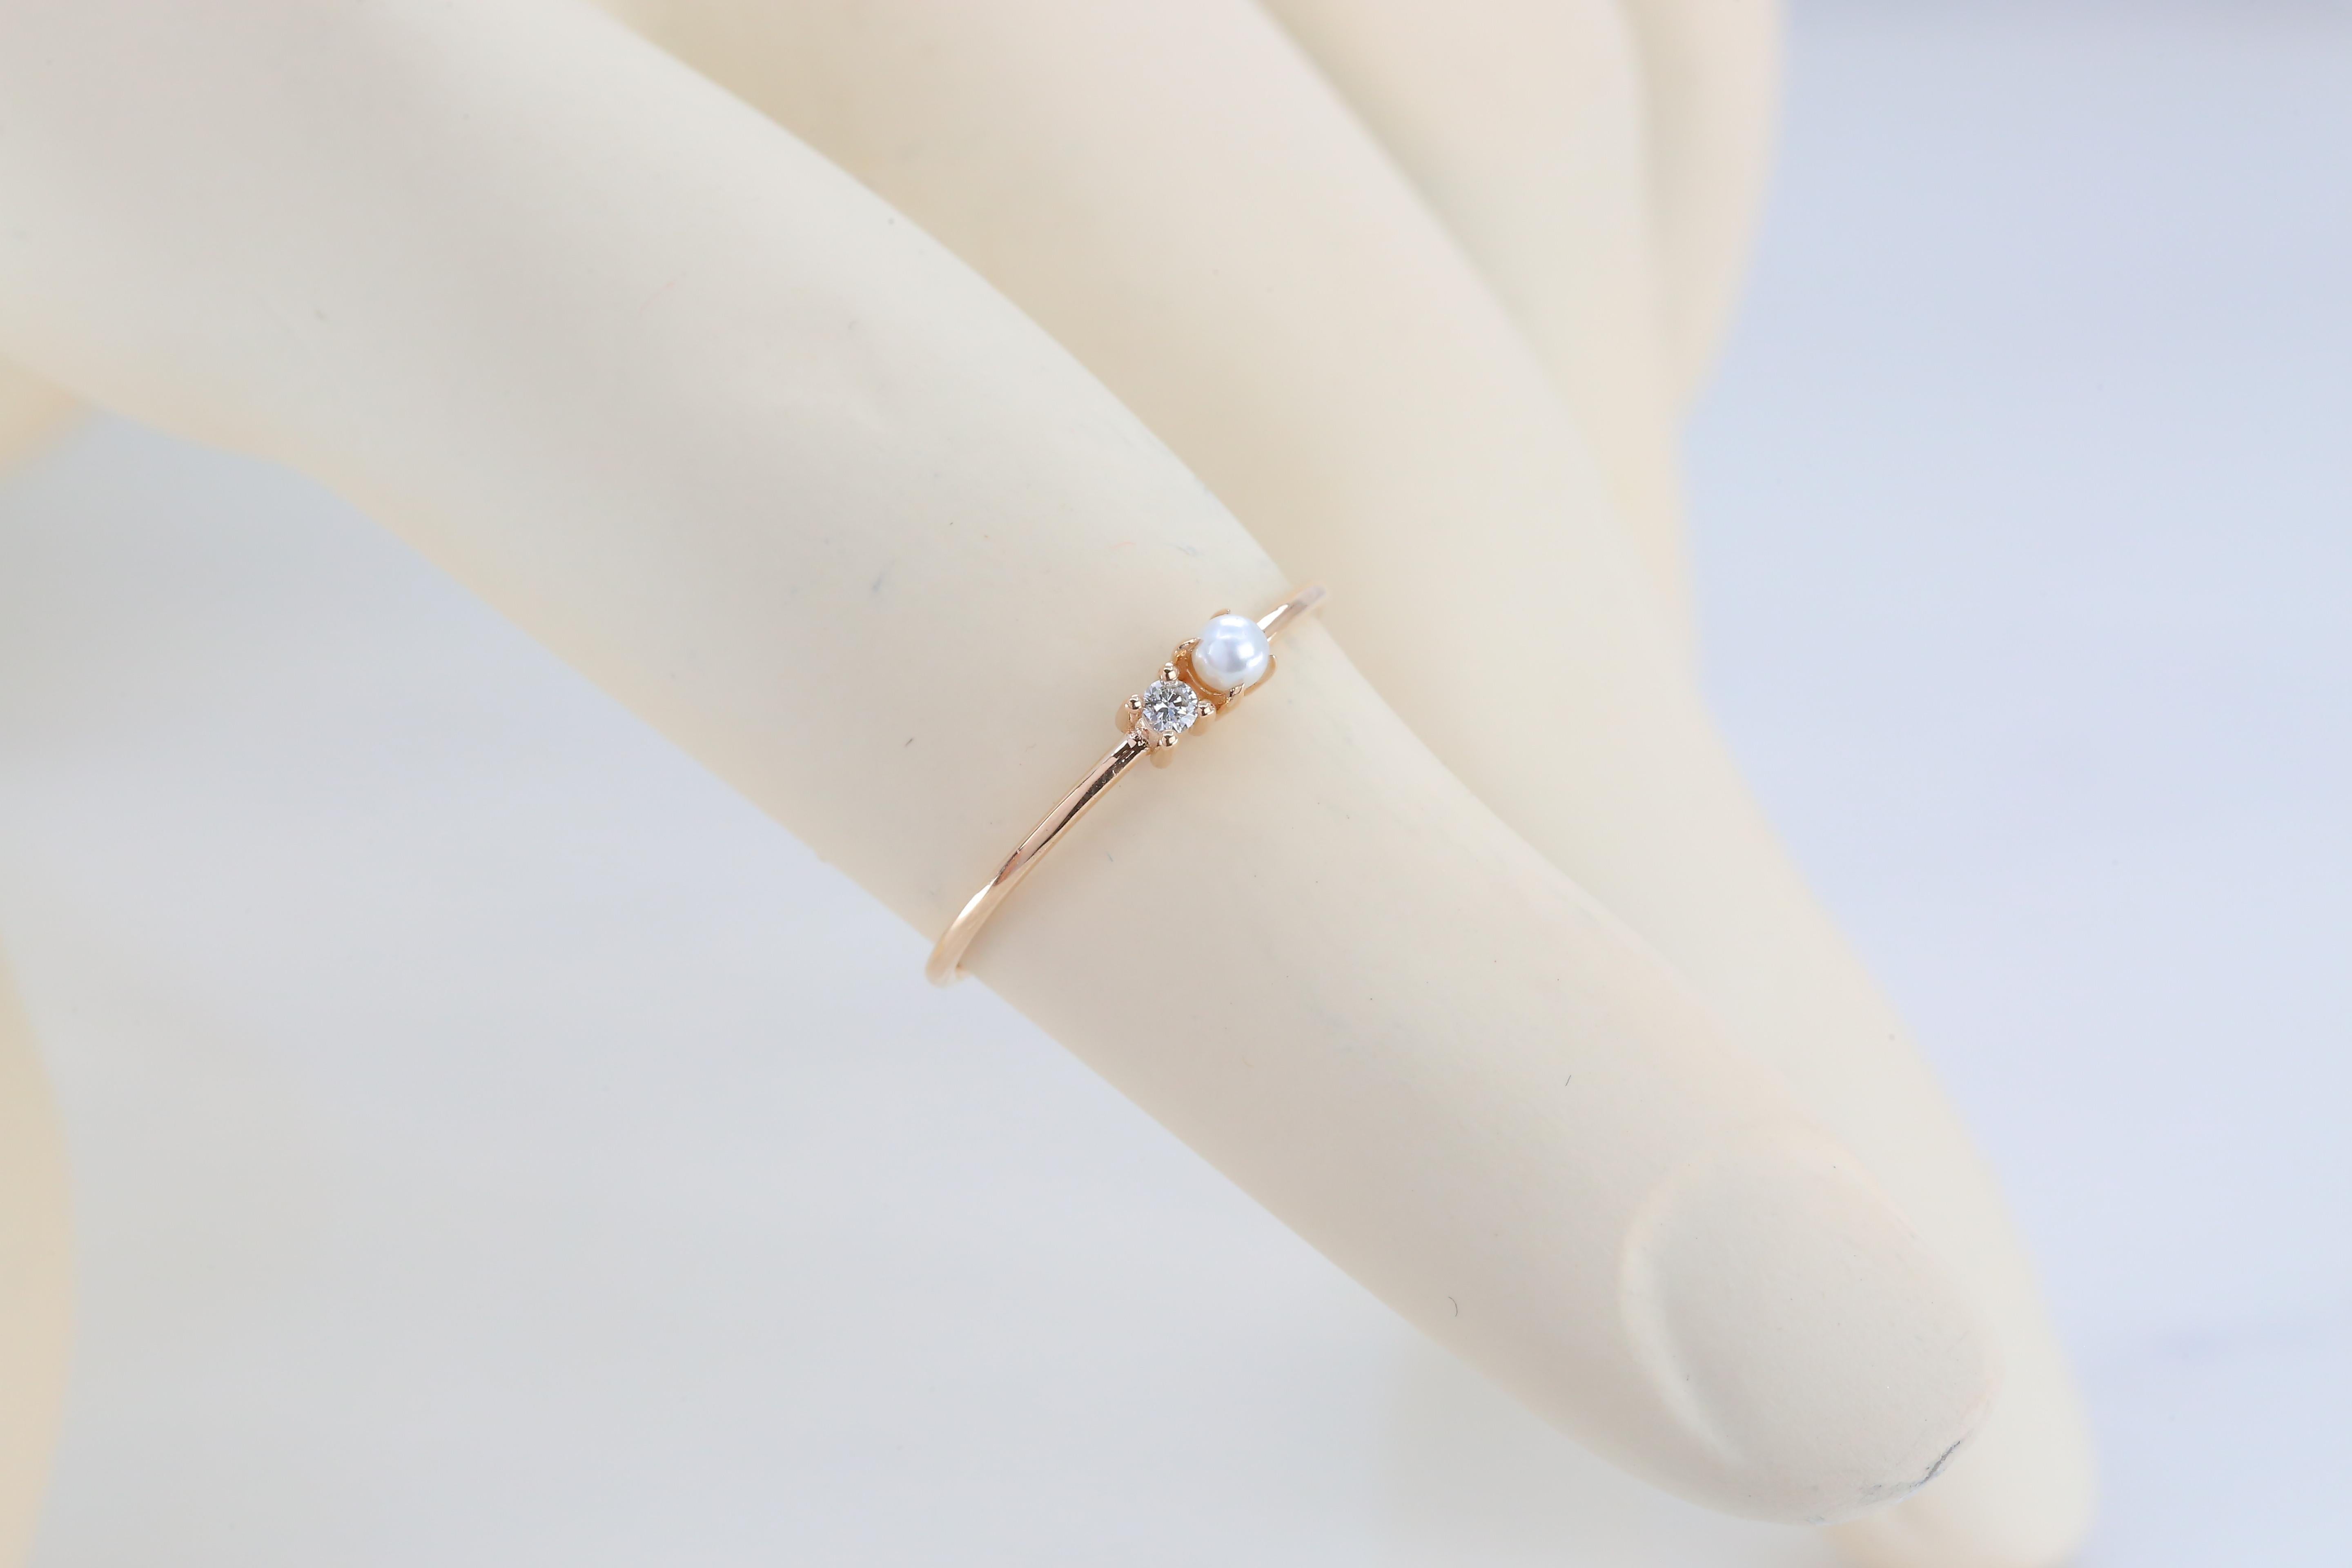 For Sale:  One Pearl and Diamond Ring, 14k Gold Pearl Ring, Minimalist Style Ring 2